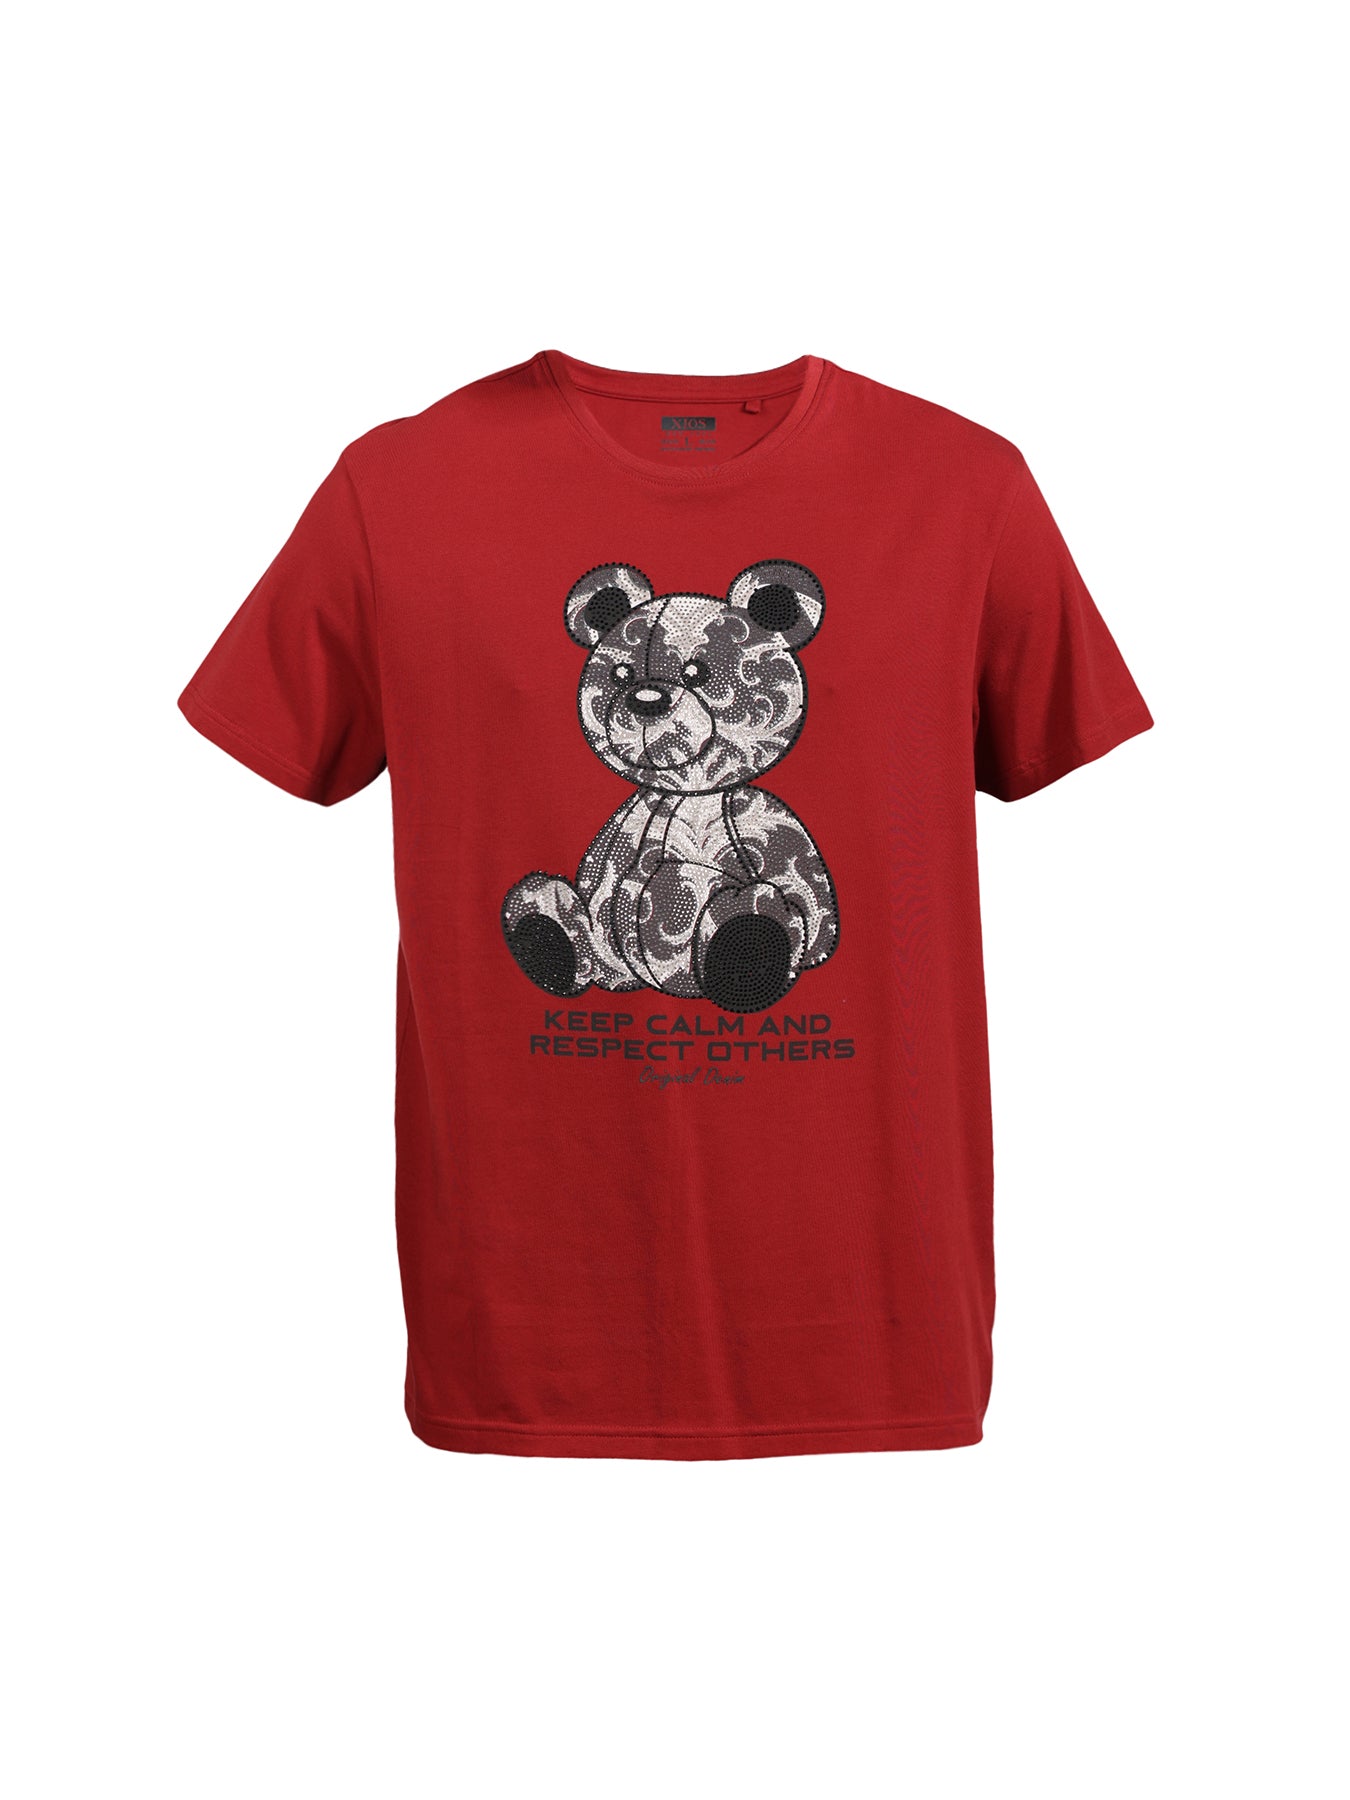 "Keep Calm and Respect Others" Teddy Bear Graphic Tee